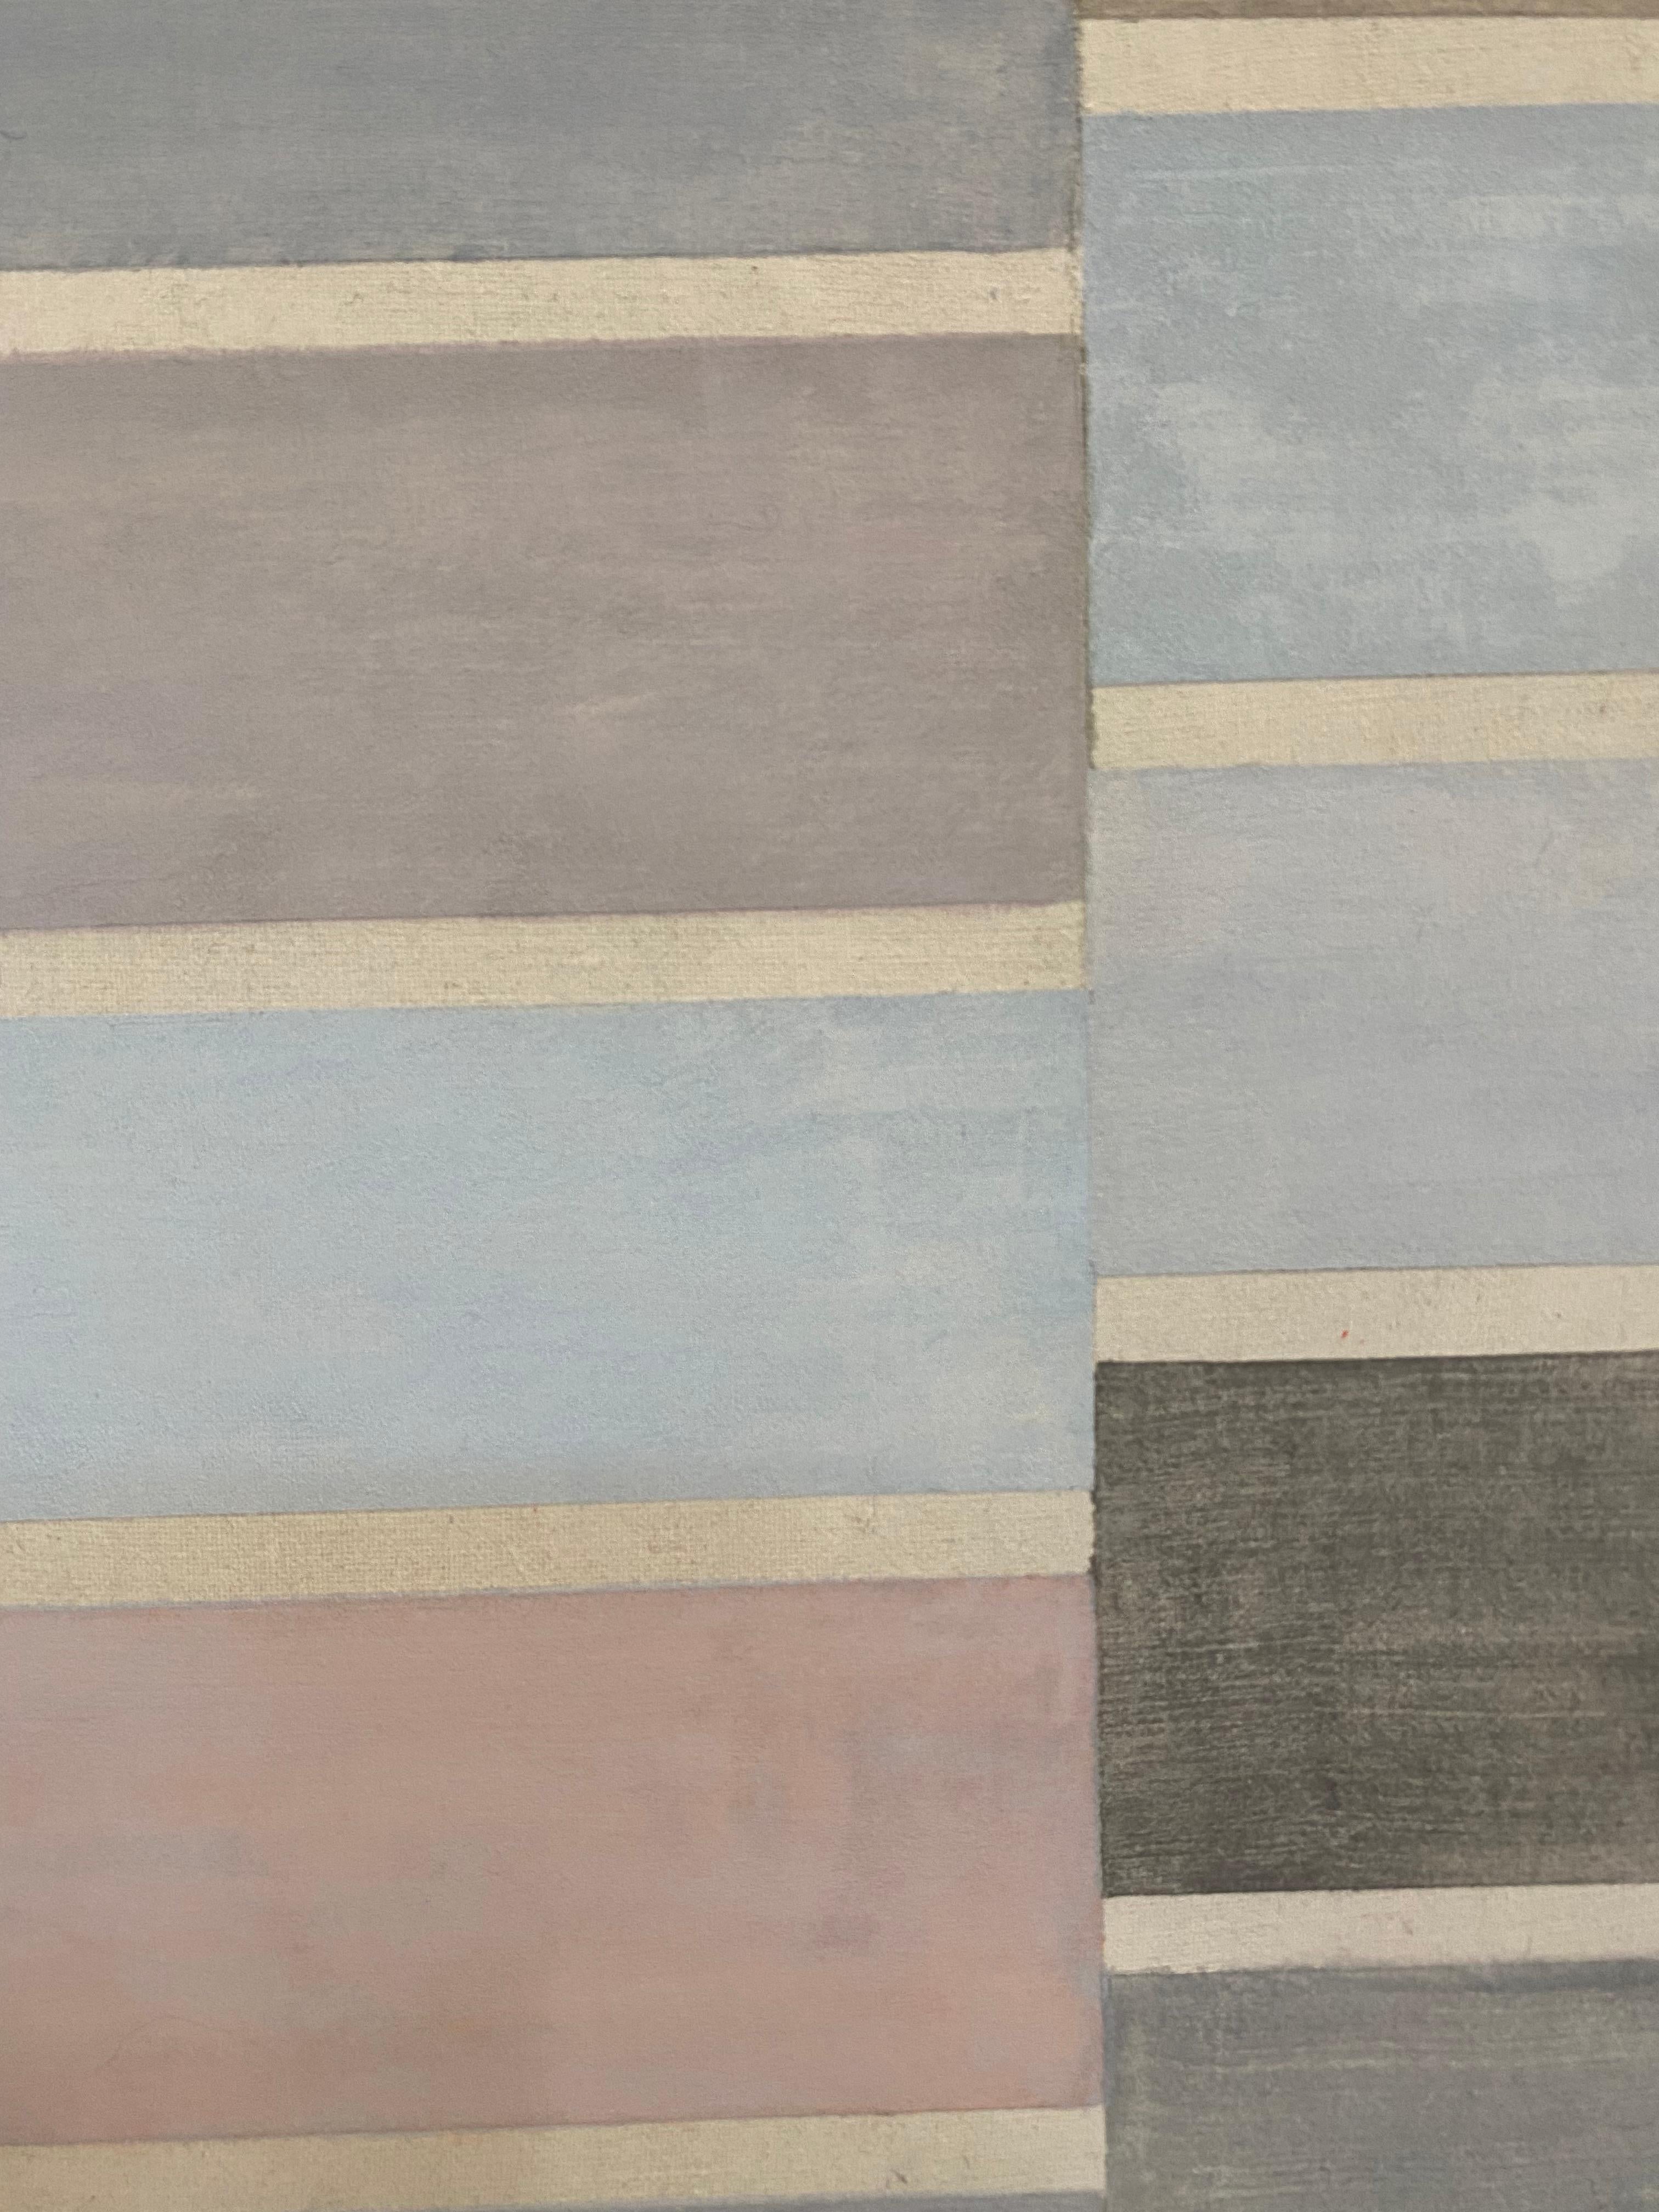 In this abstract painting in acrylic on linen mounted on a shaped panel by Elizabeth Gourlay, carefully ordered horizontal blocks of color in pale gray blue, lavender, dark gray and lilac violet are luminous against thinner neutral sections of